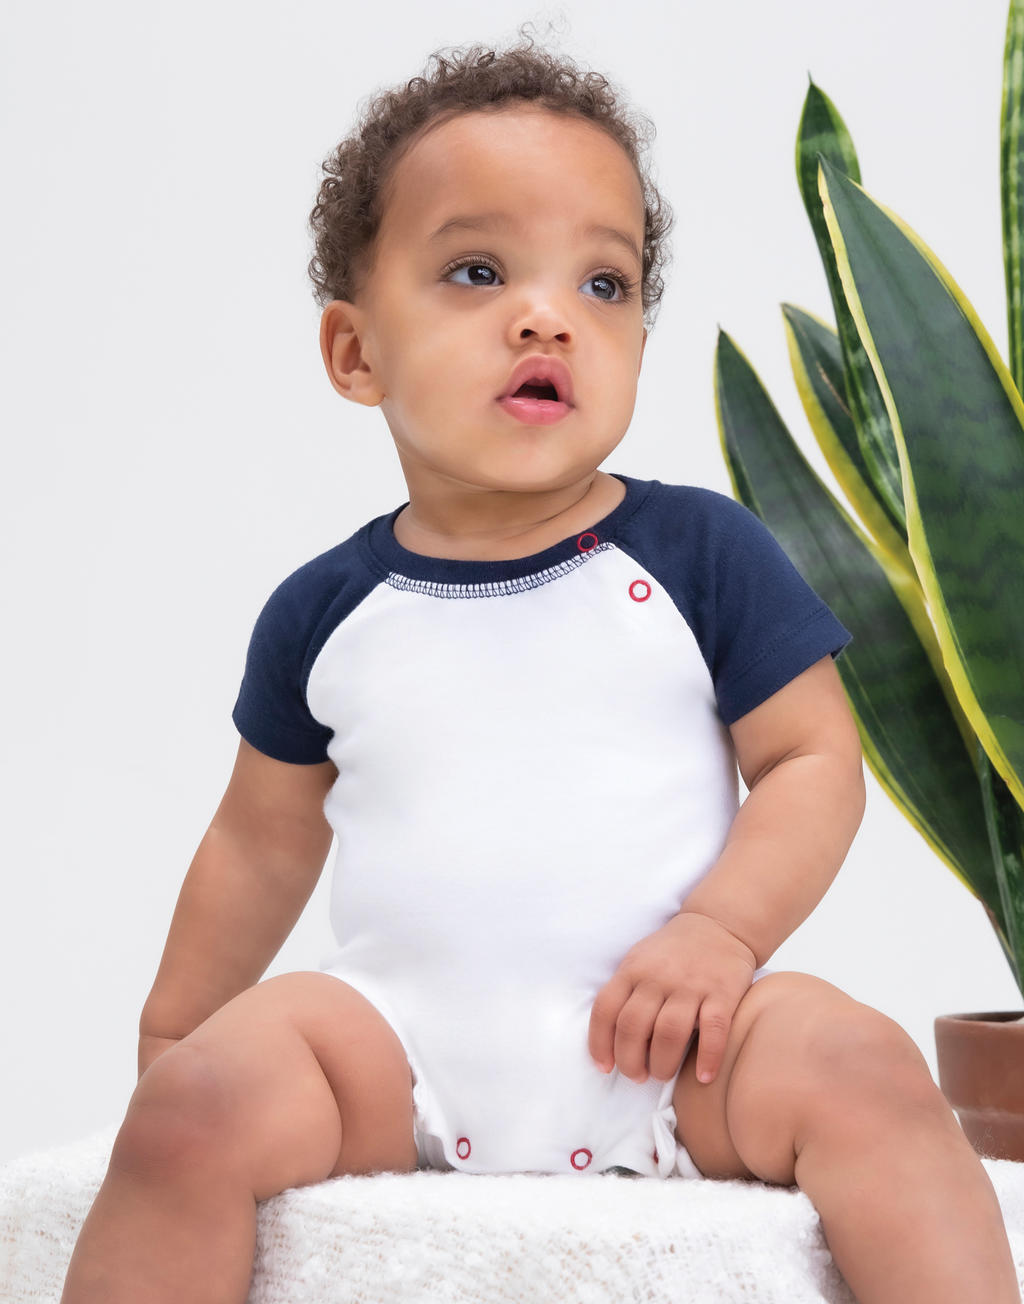  Baby Baseball Playsuit in Farbe White/Heather Grey/Red